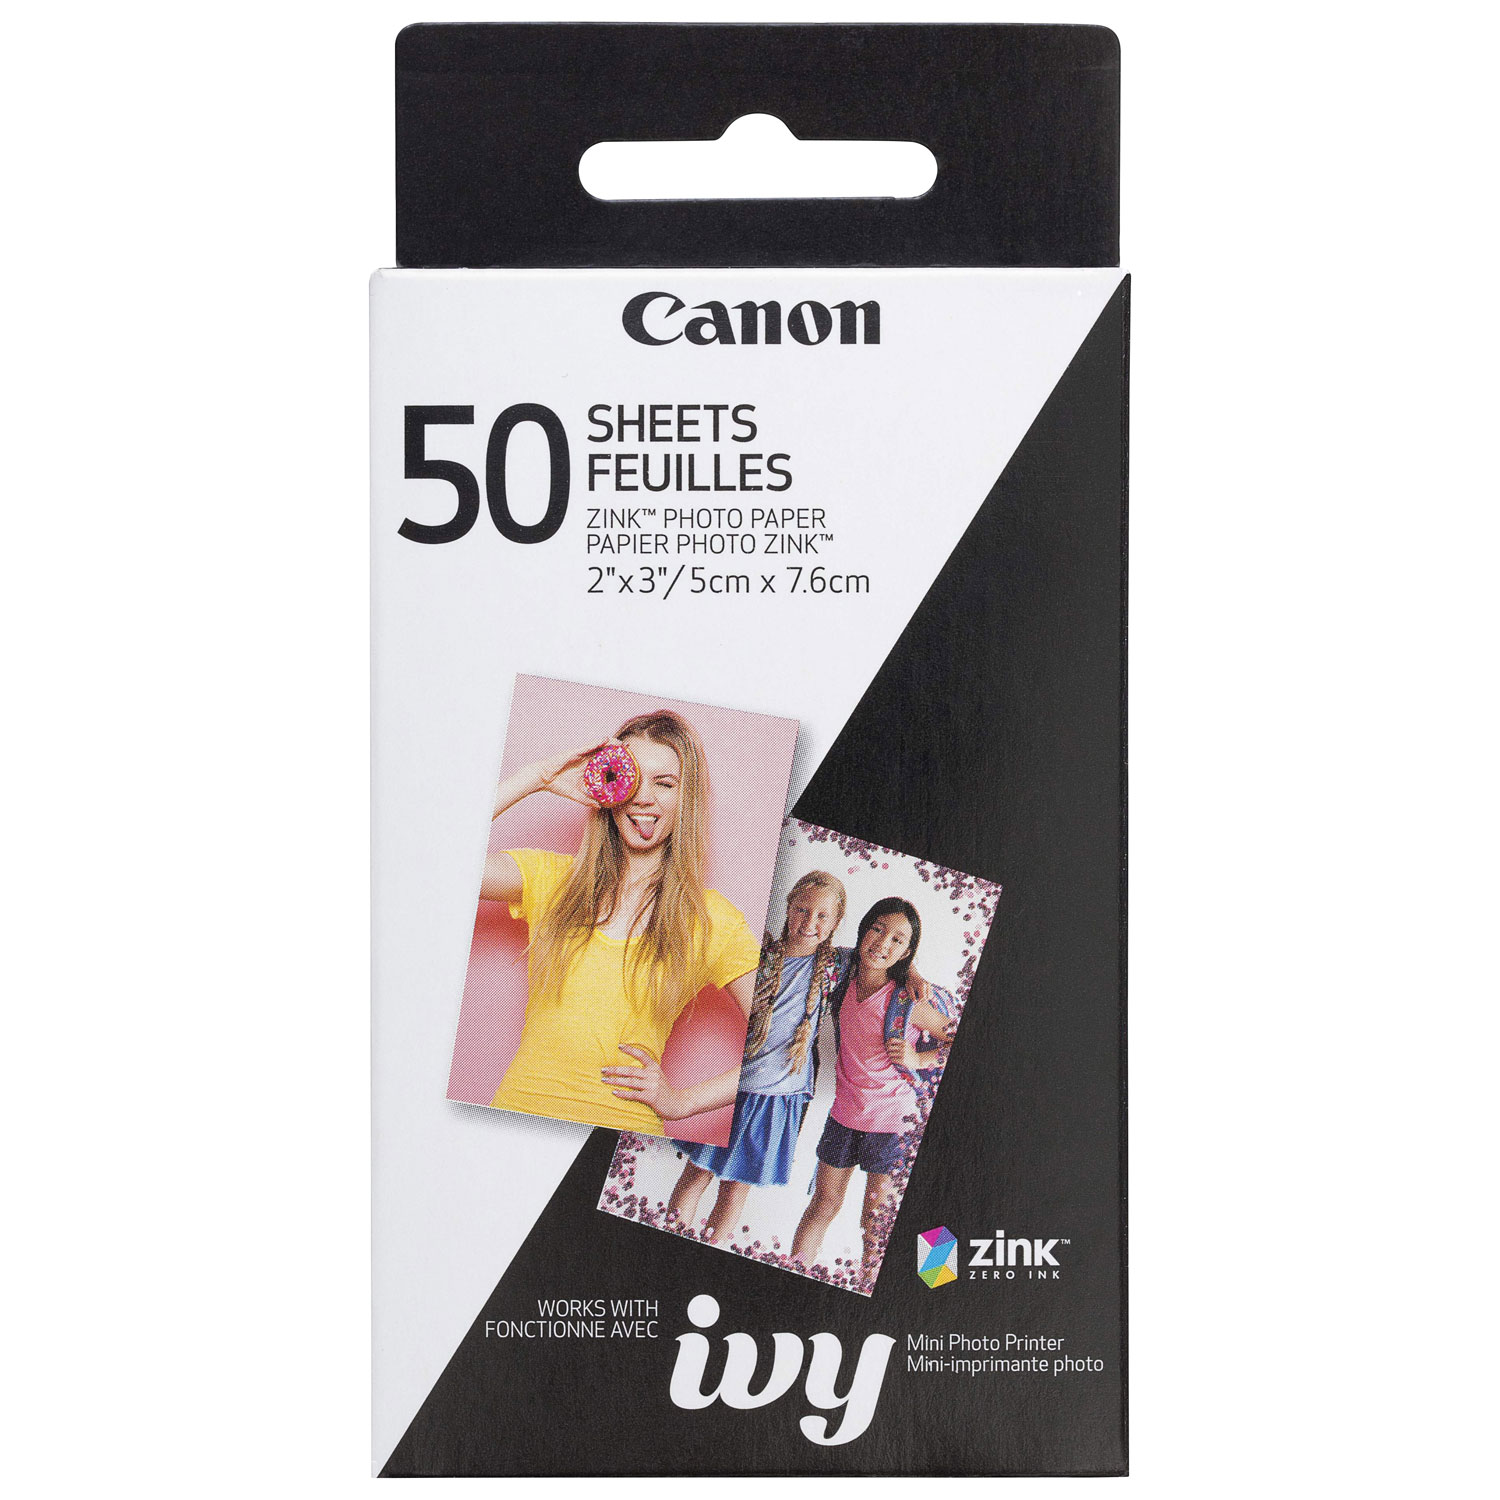 Canon ZINK 50-Sheet 2" x 3" Photo Paper for IVY Mini Photo Printer